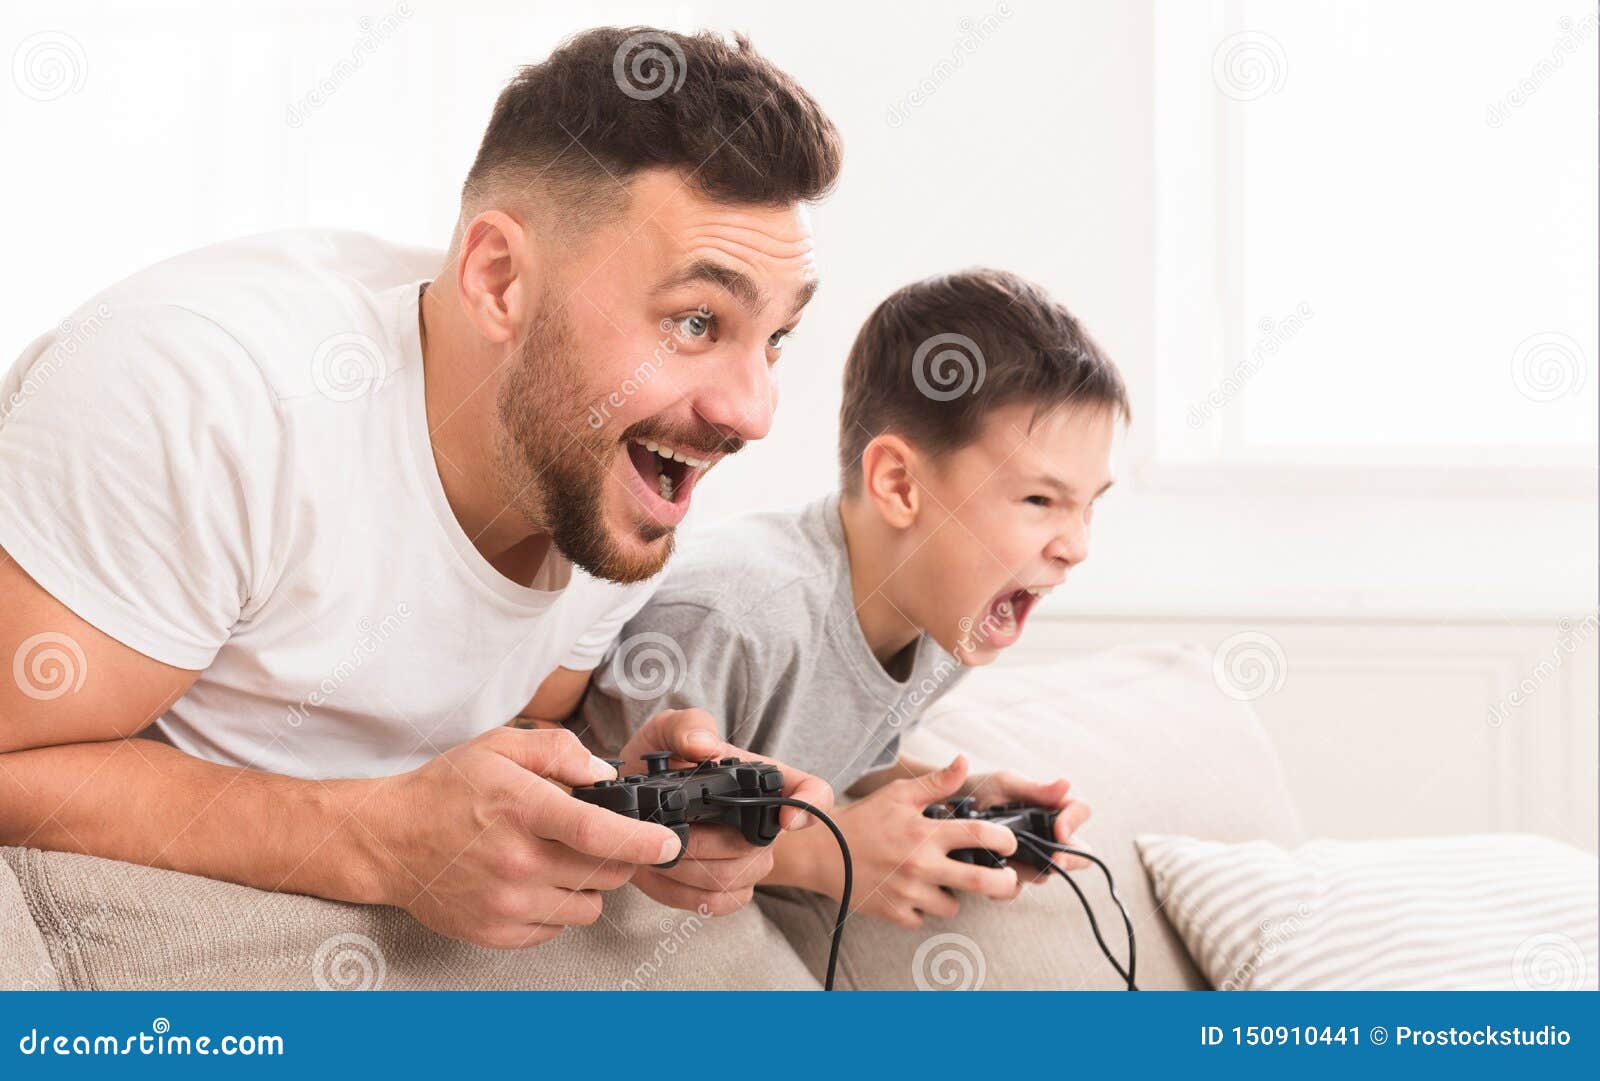 father and son video game